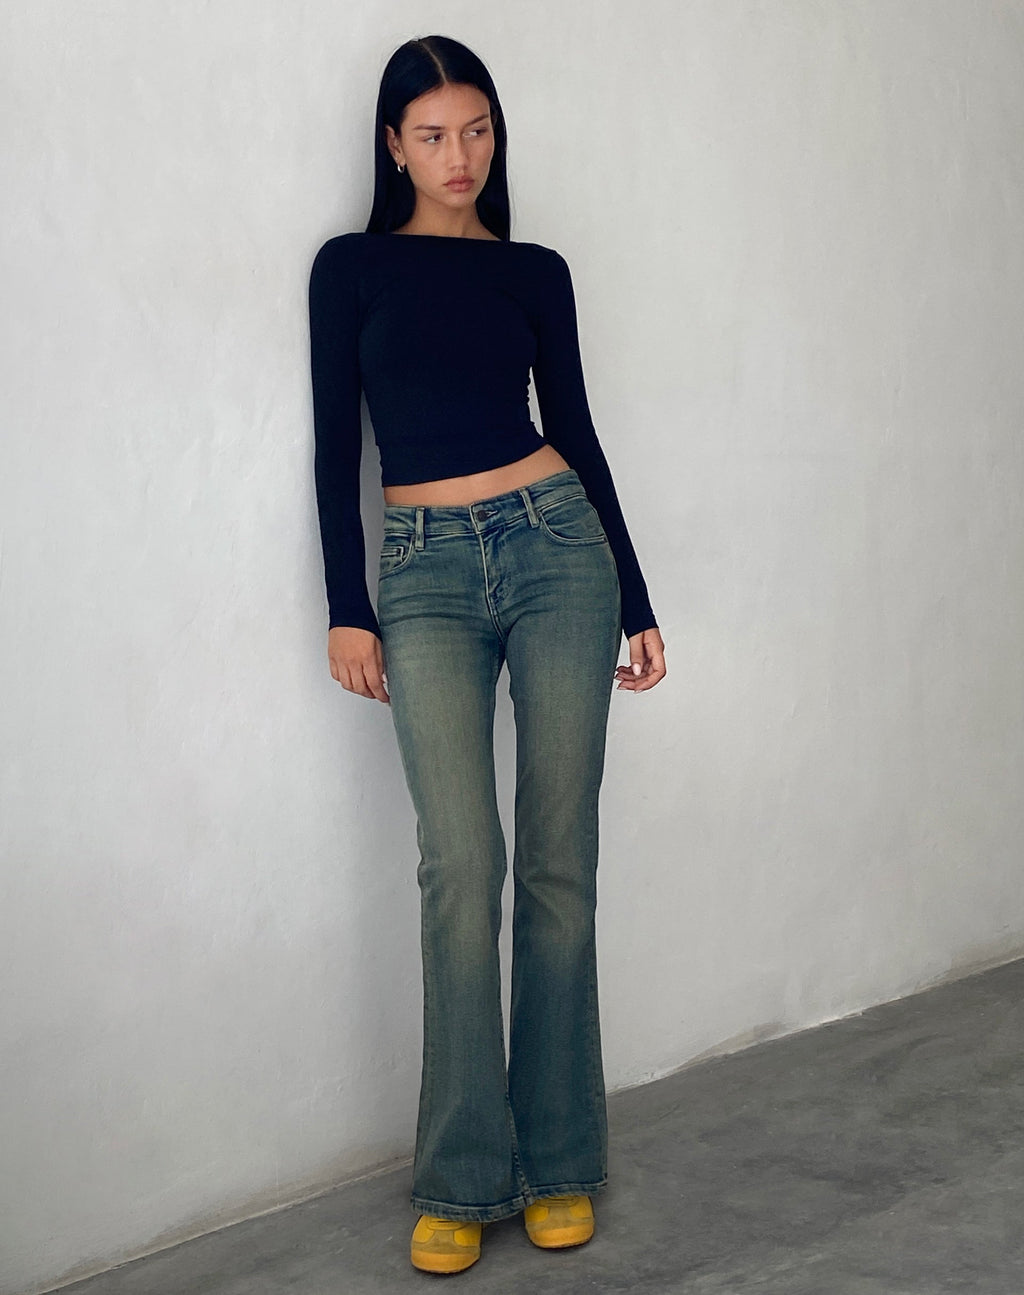 Low Rise Flared Jeans in grüner Waschung